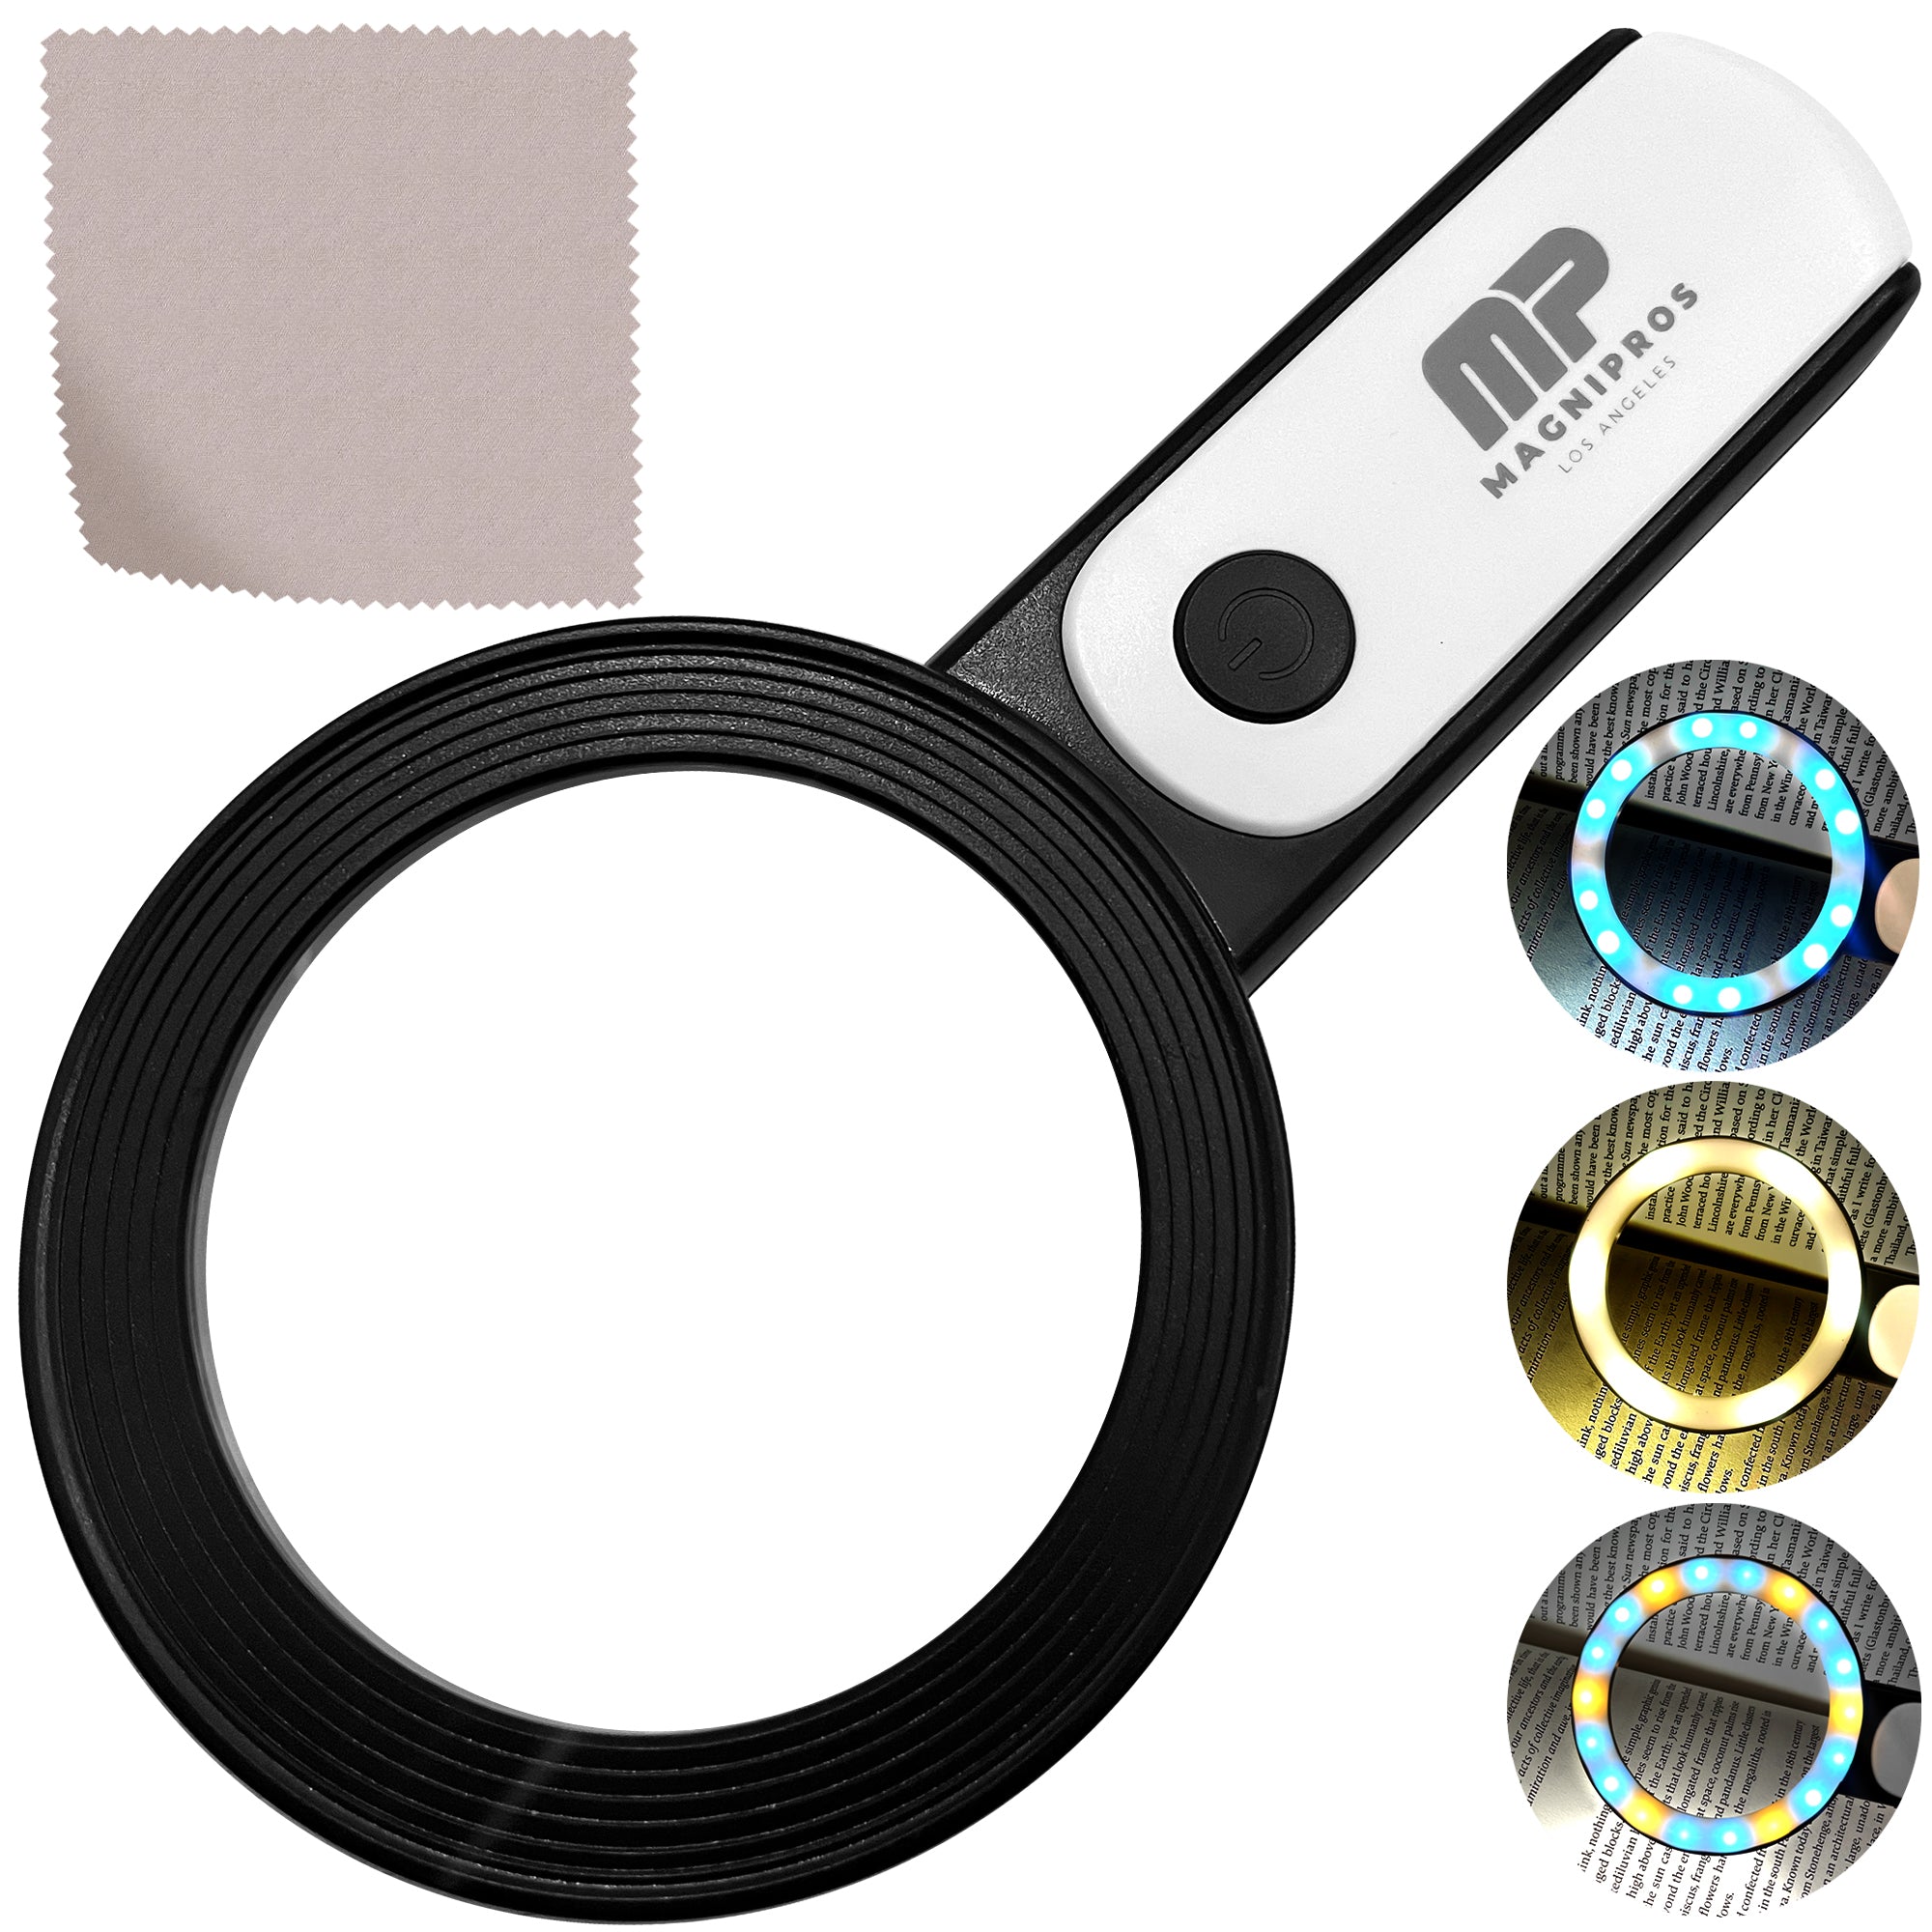 Oversize Magnifying Glass in Oversize Items & Event Pieces